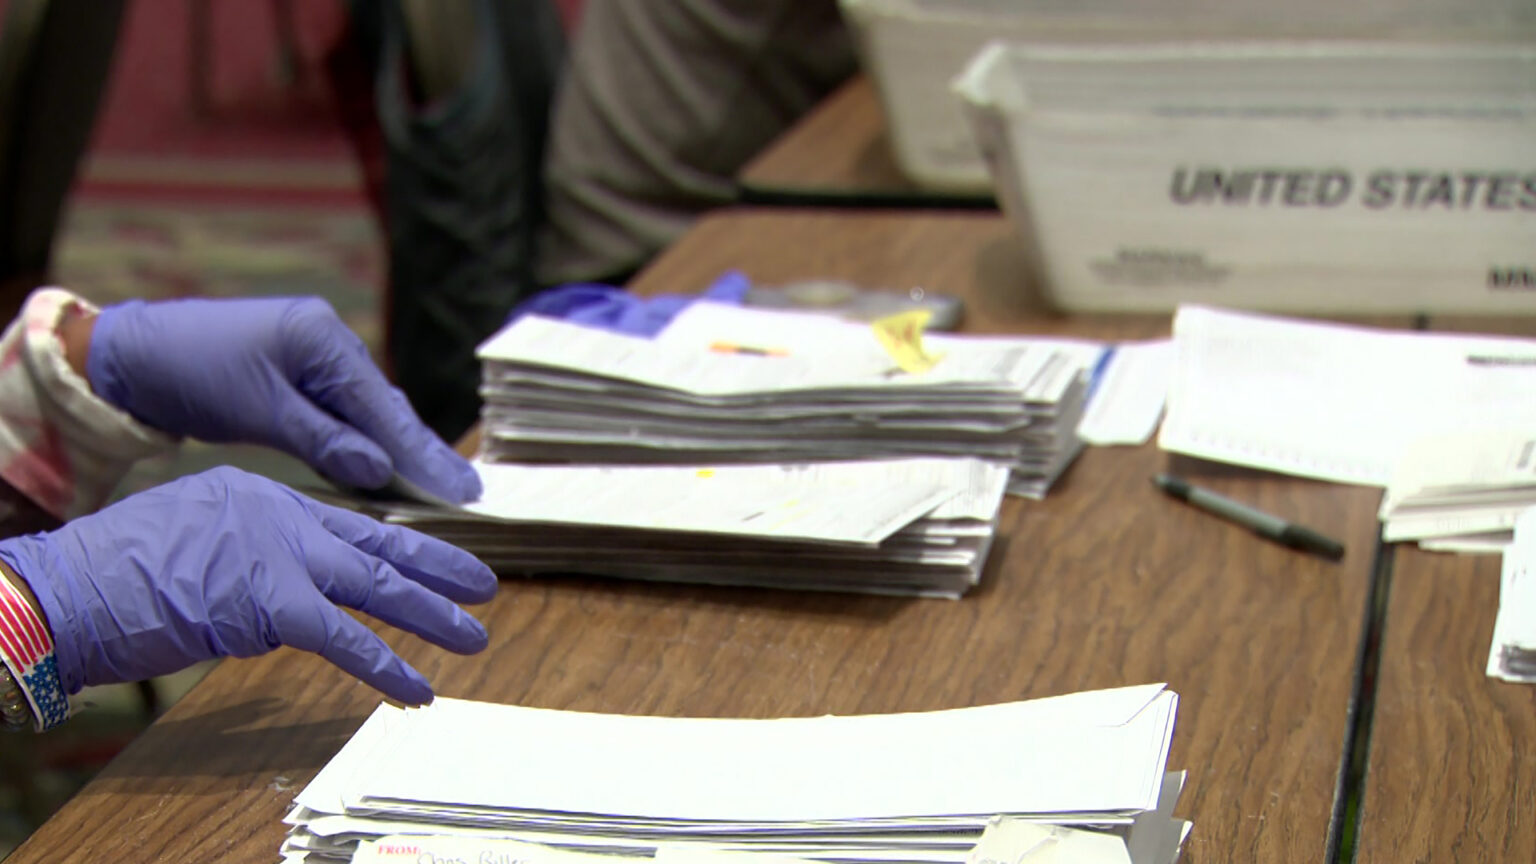 A pair of hands wearing nitrile gloves reaches toward a stack of envelopes on a laminated wood tabletop, with other stacks in the background alongside empty plastic U.S. mail trays.